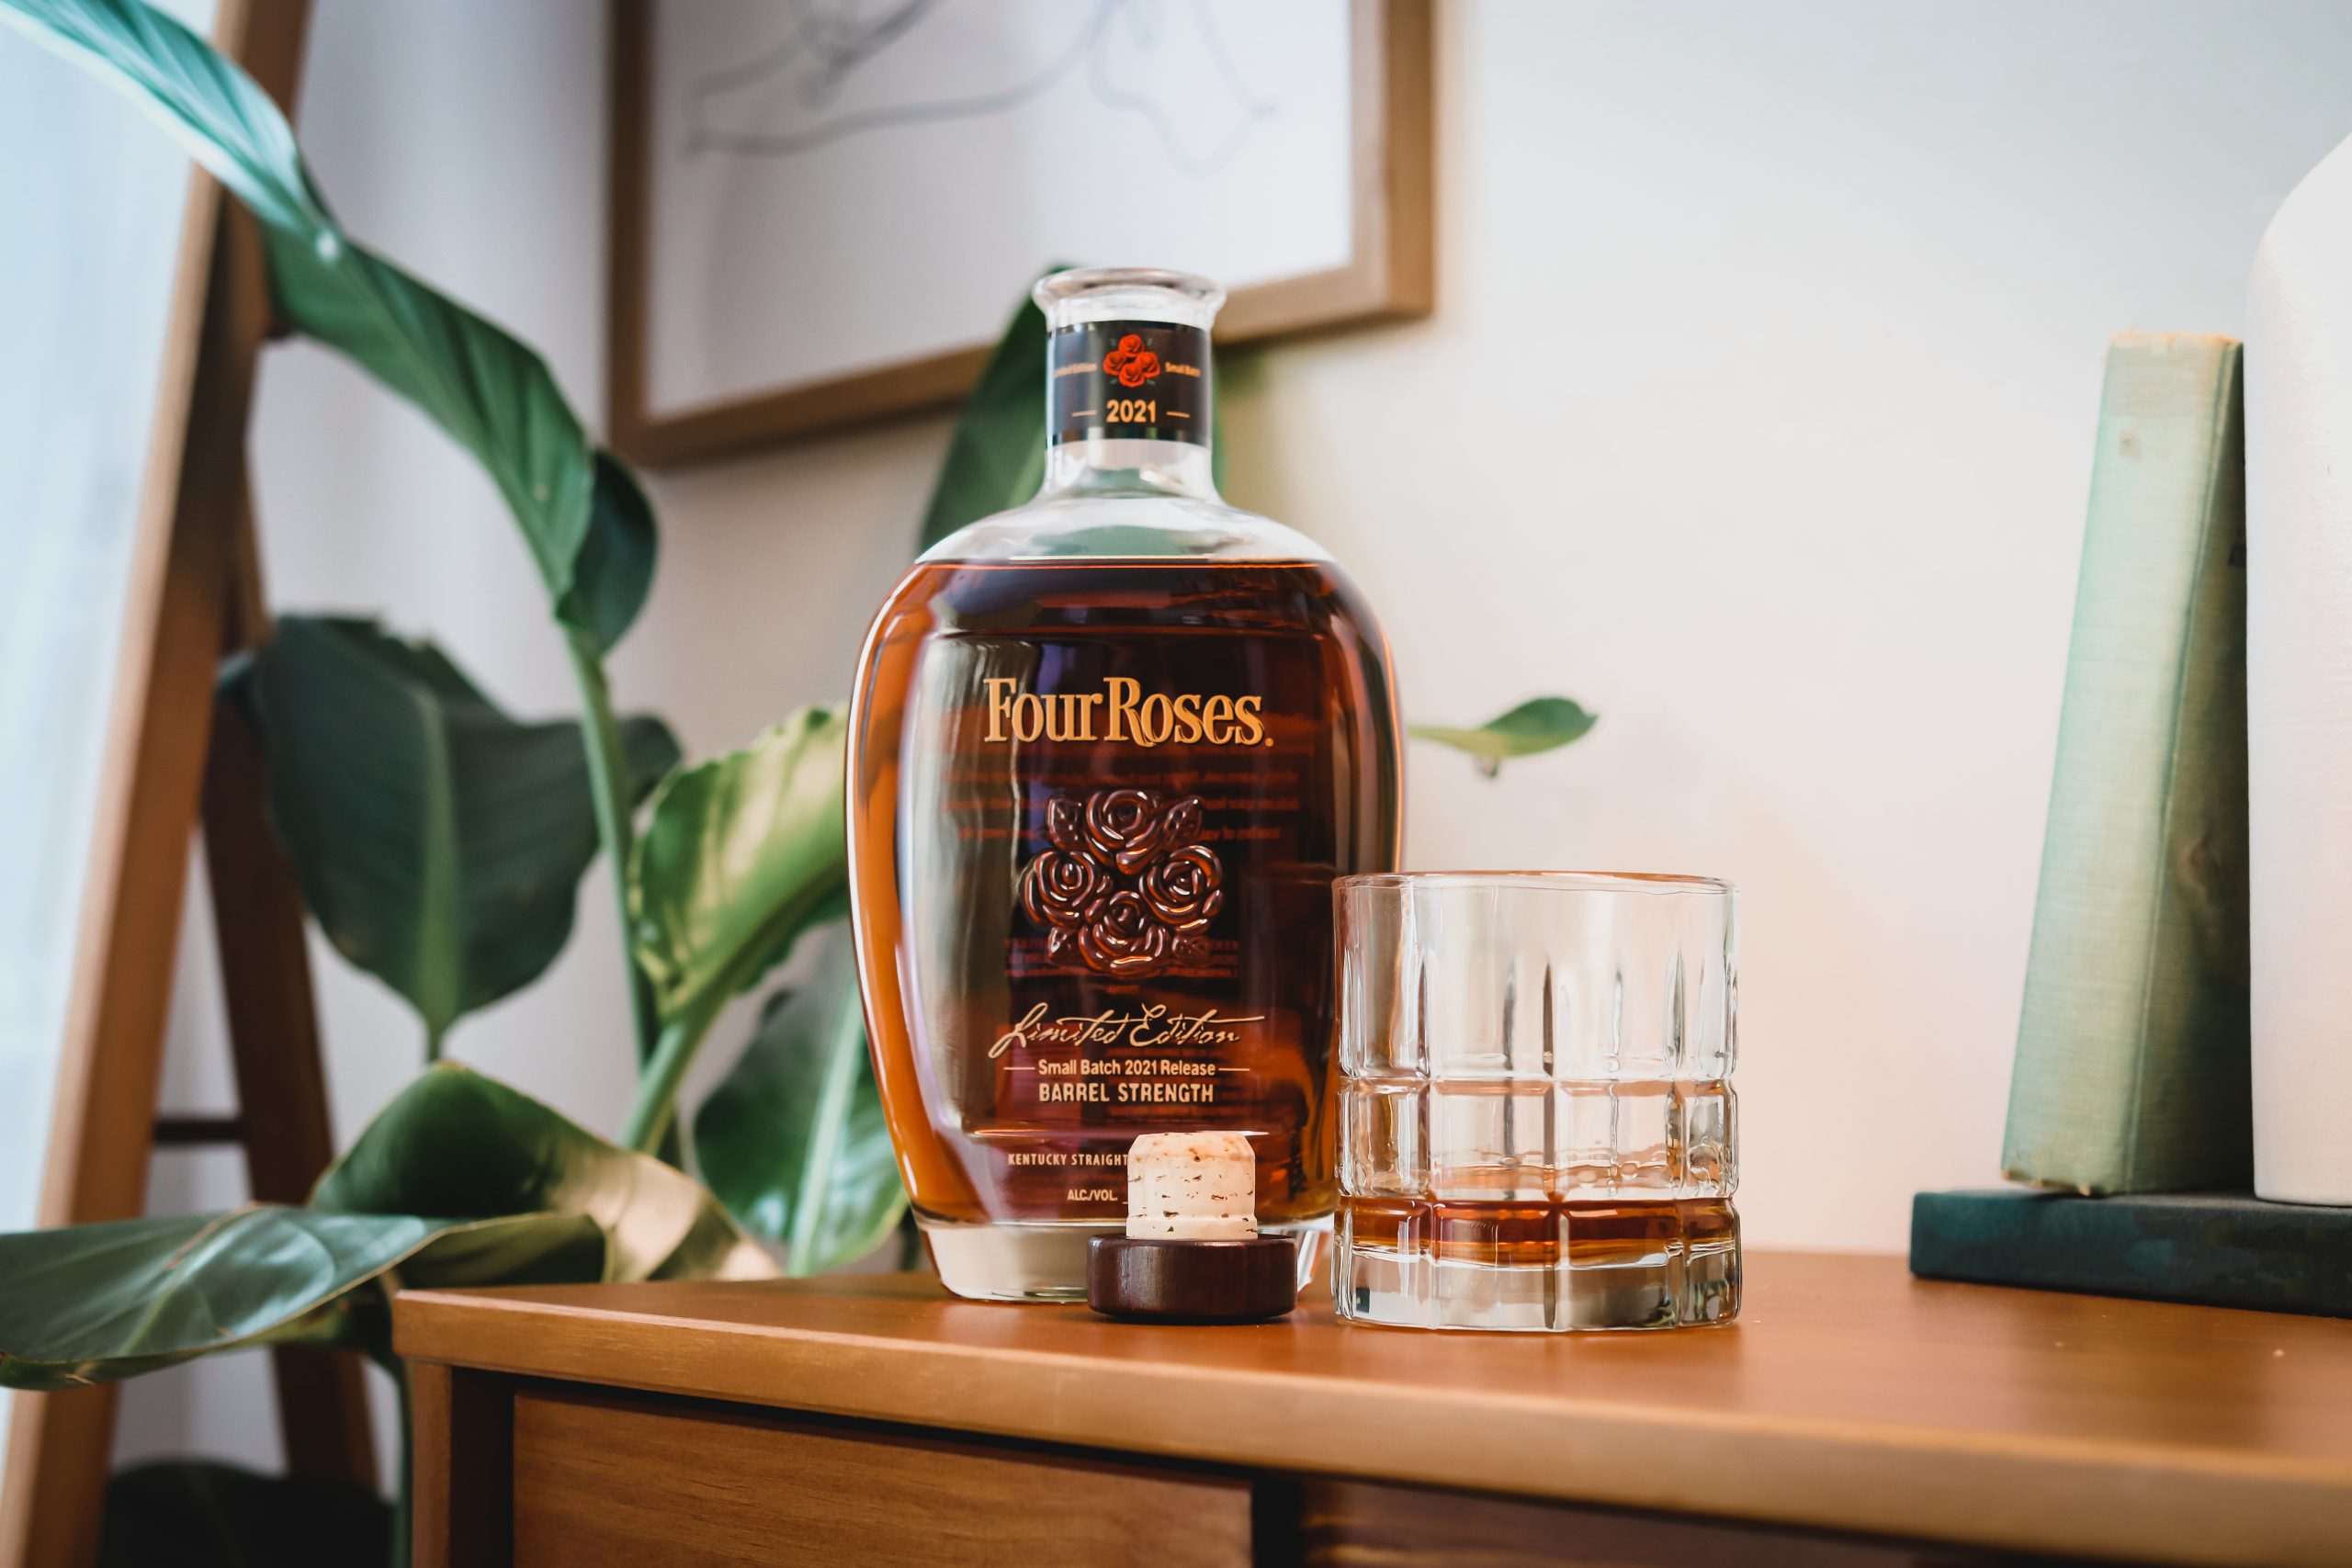 four roses small batch